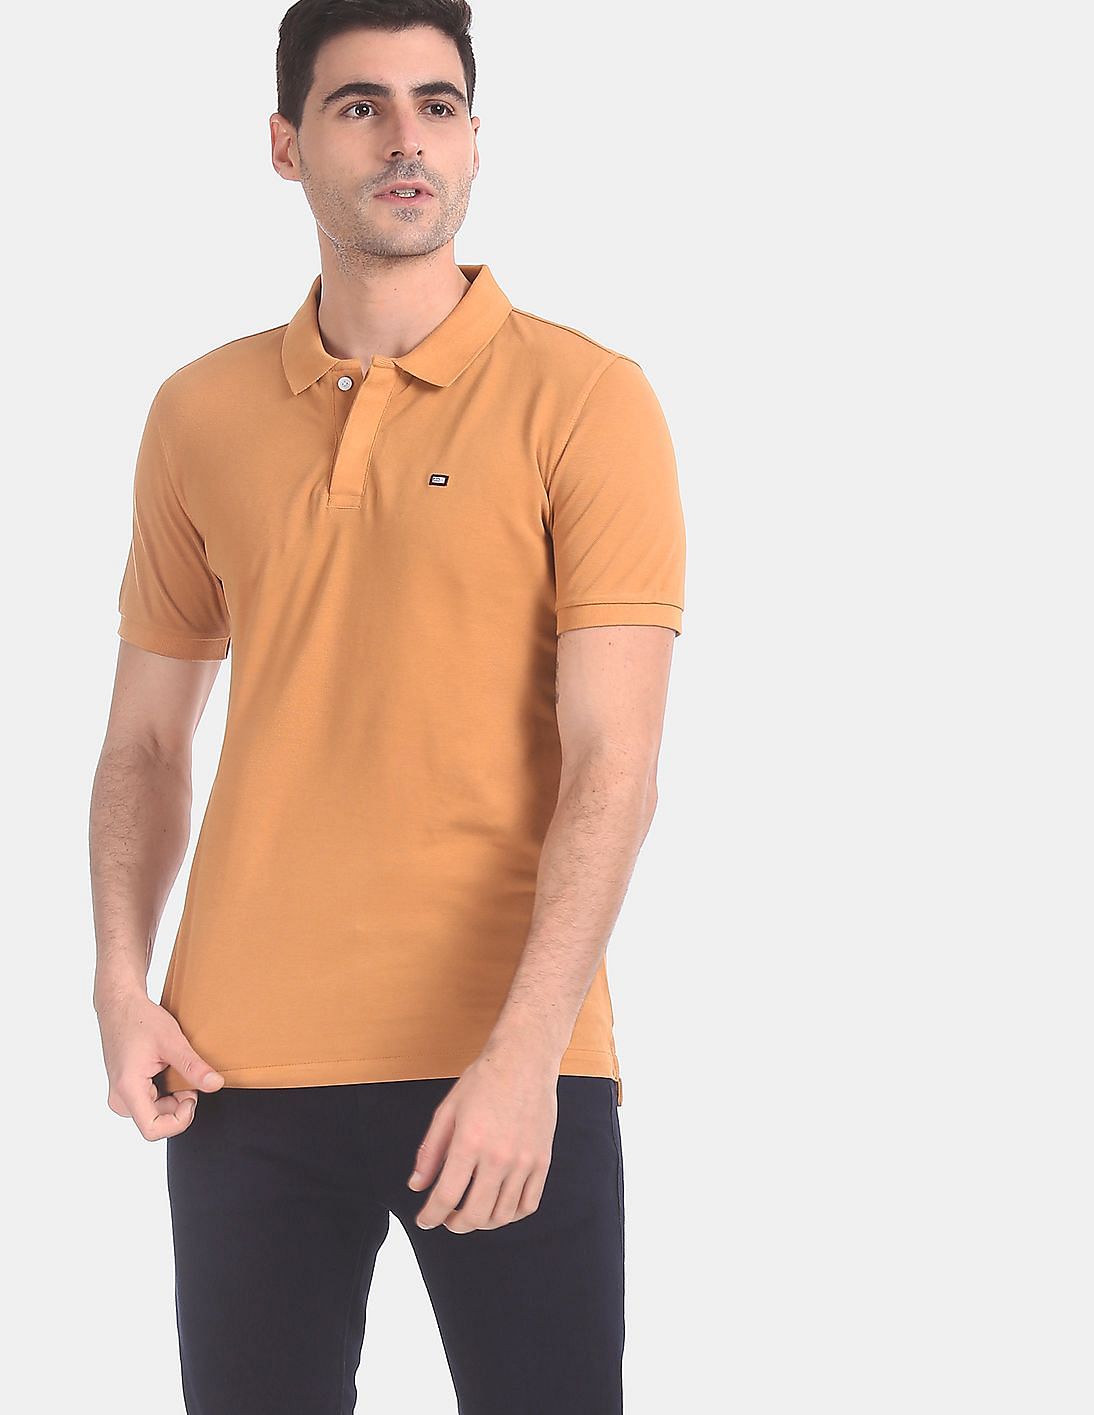 Buy Arrow Sports Concealed Placket Solid Polo Shirt - NNNOW.com